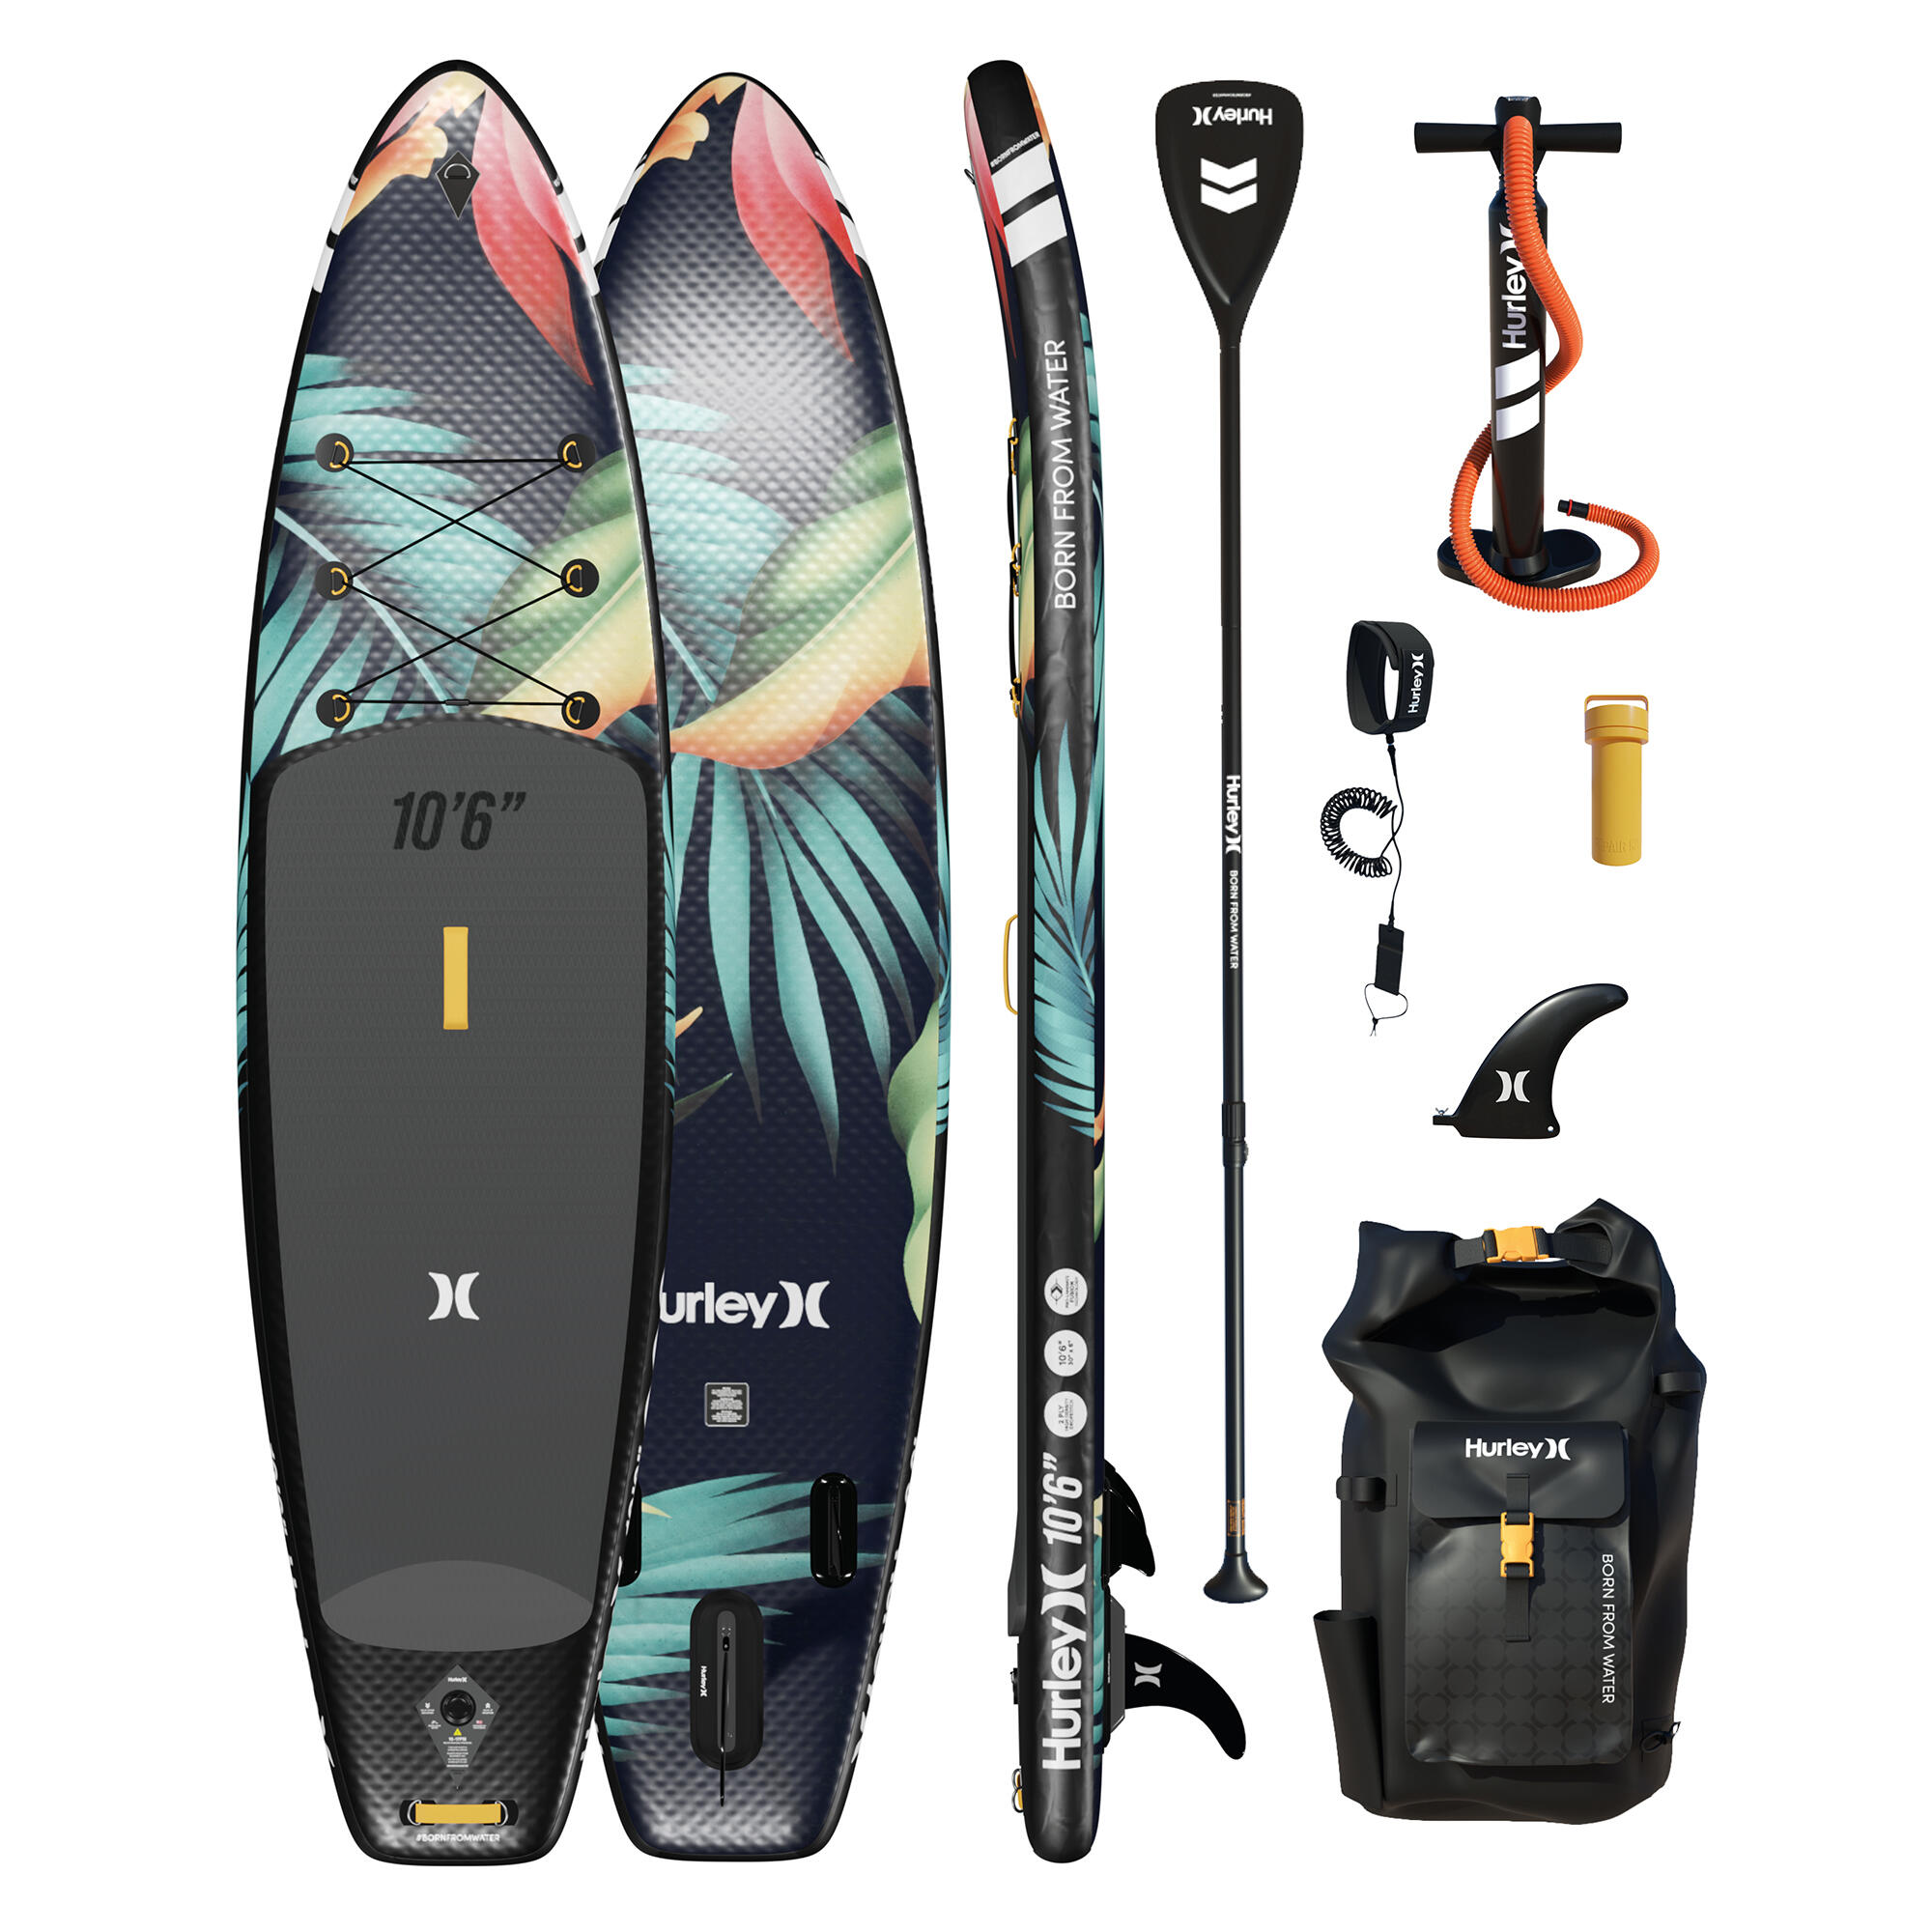 HURLEY Hurley Phantomtour PARADISE 10'6 Inflatable Paddle Board Package